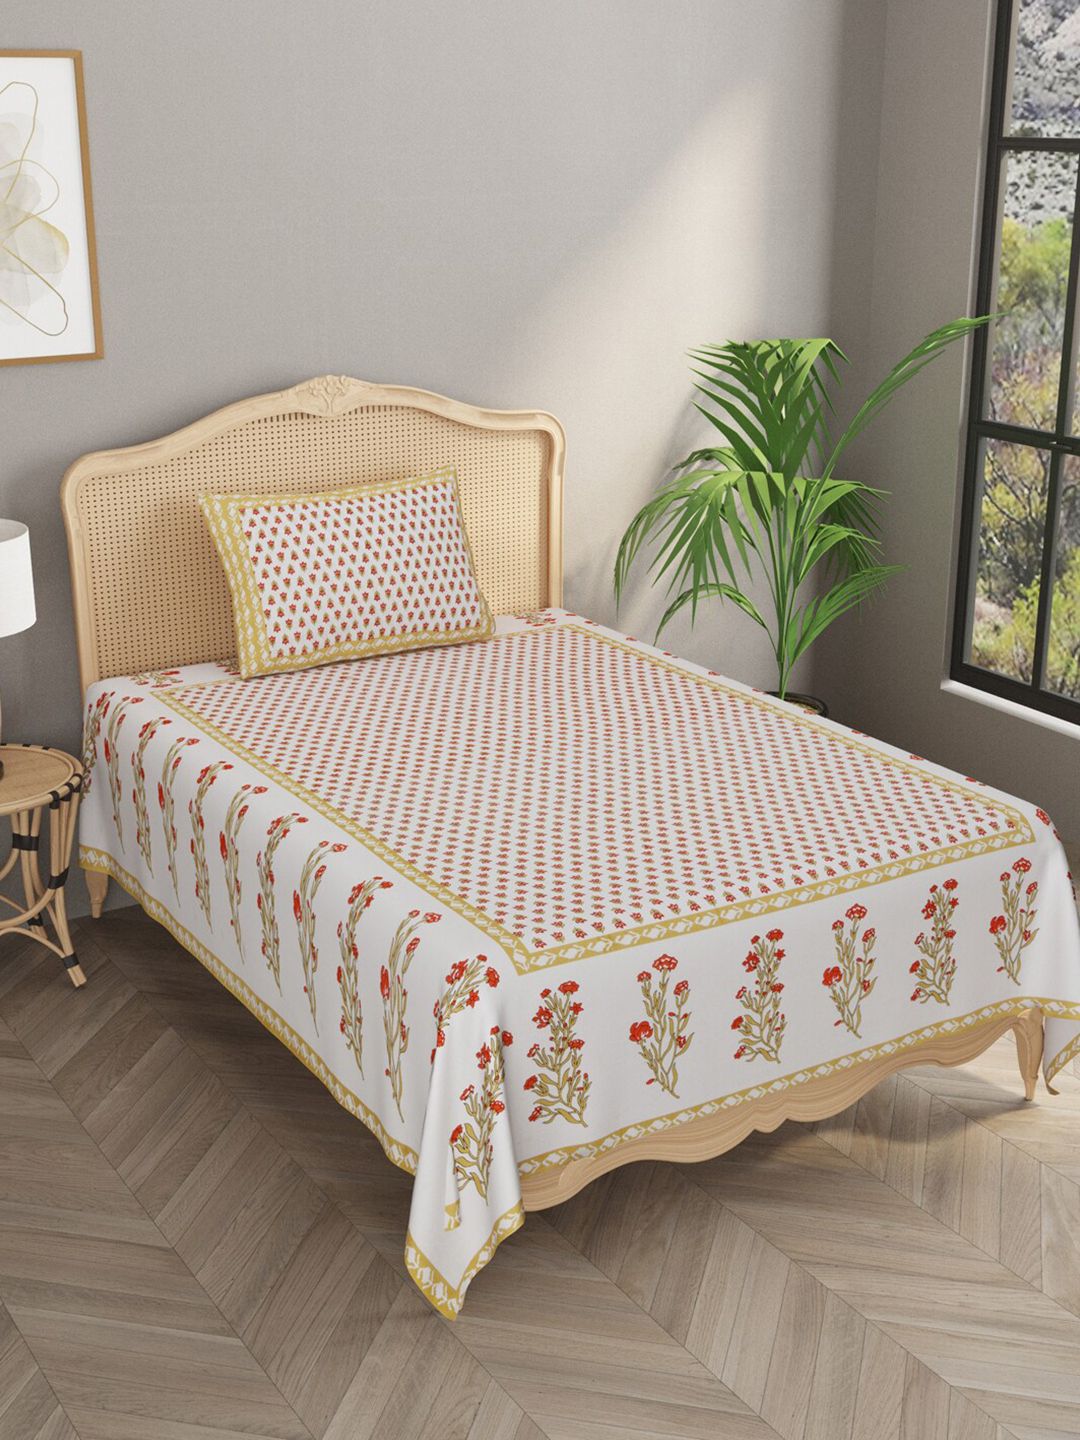 Gulaab Jaipur White & Cream-Coloured Ethnic Motifs 600 TC Single Bedsheet with 1 Pillow Covers Price in India